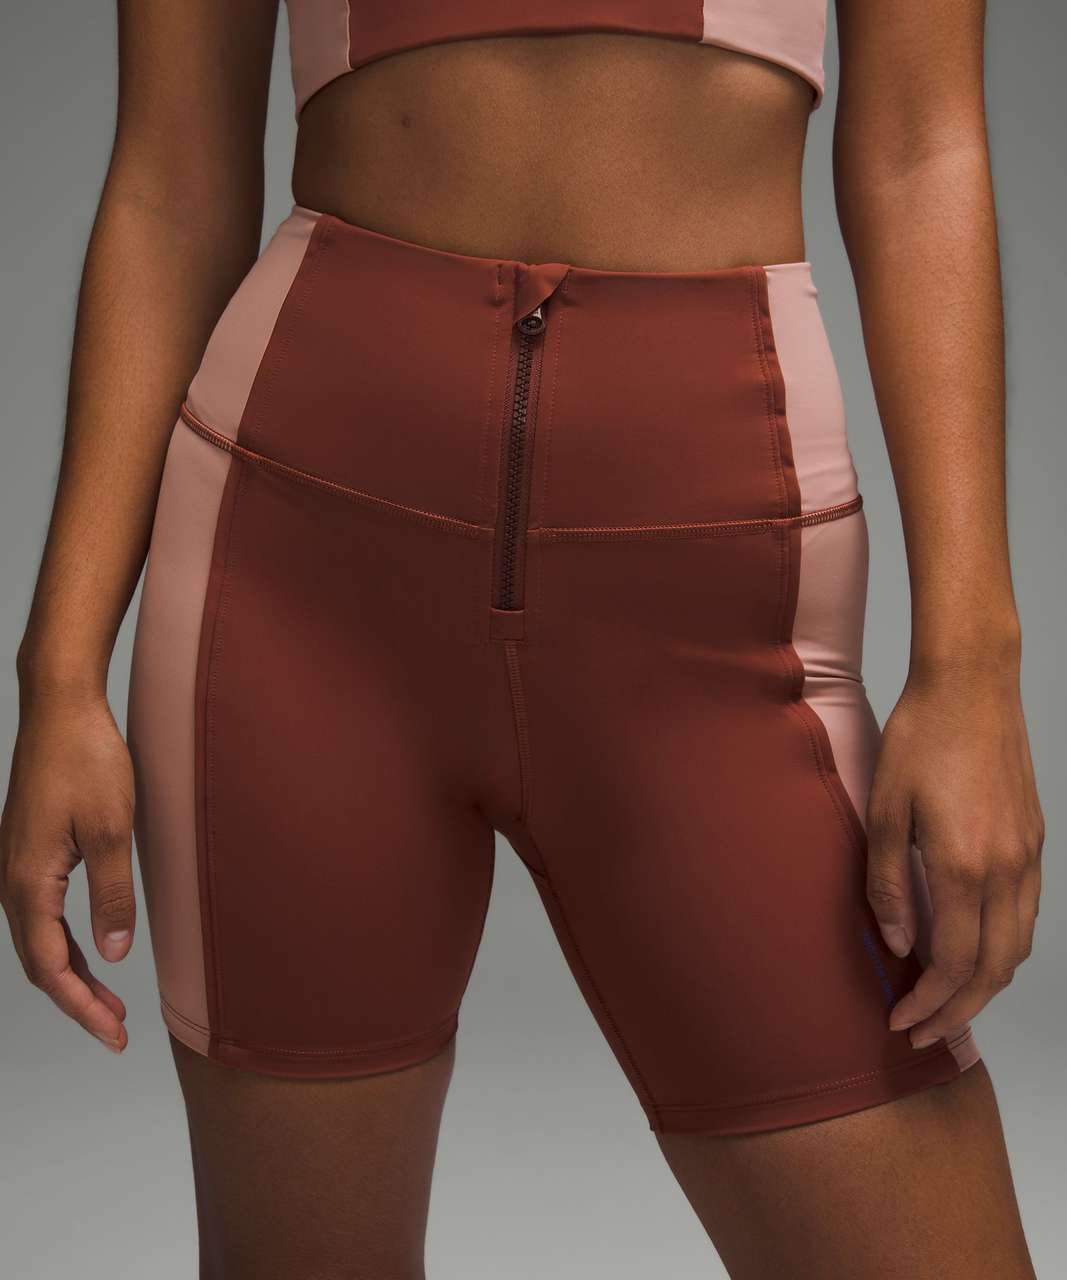 Lululemon Hike to Swim Short 6" - Ancient Copper / Pink Clay / Ancient Copper